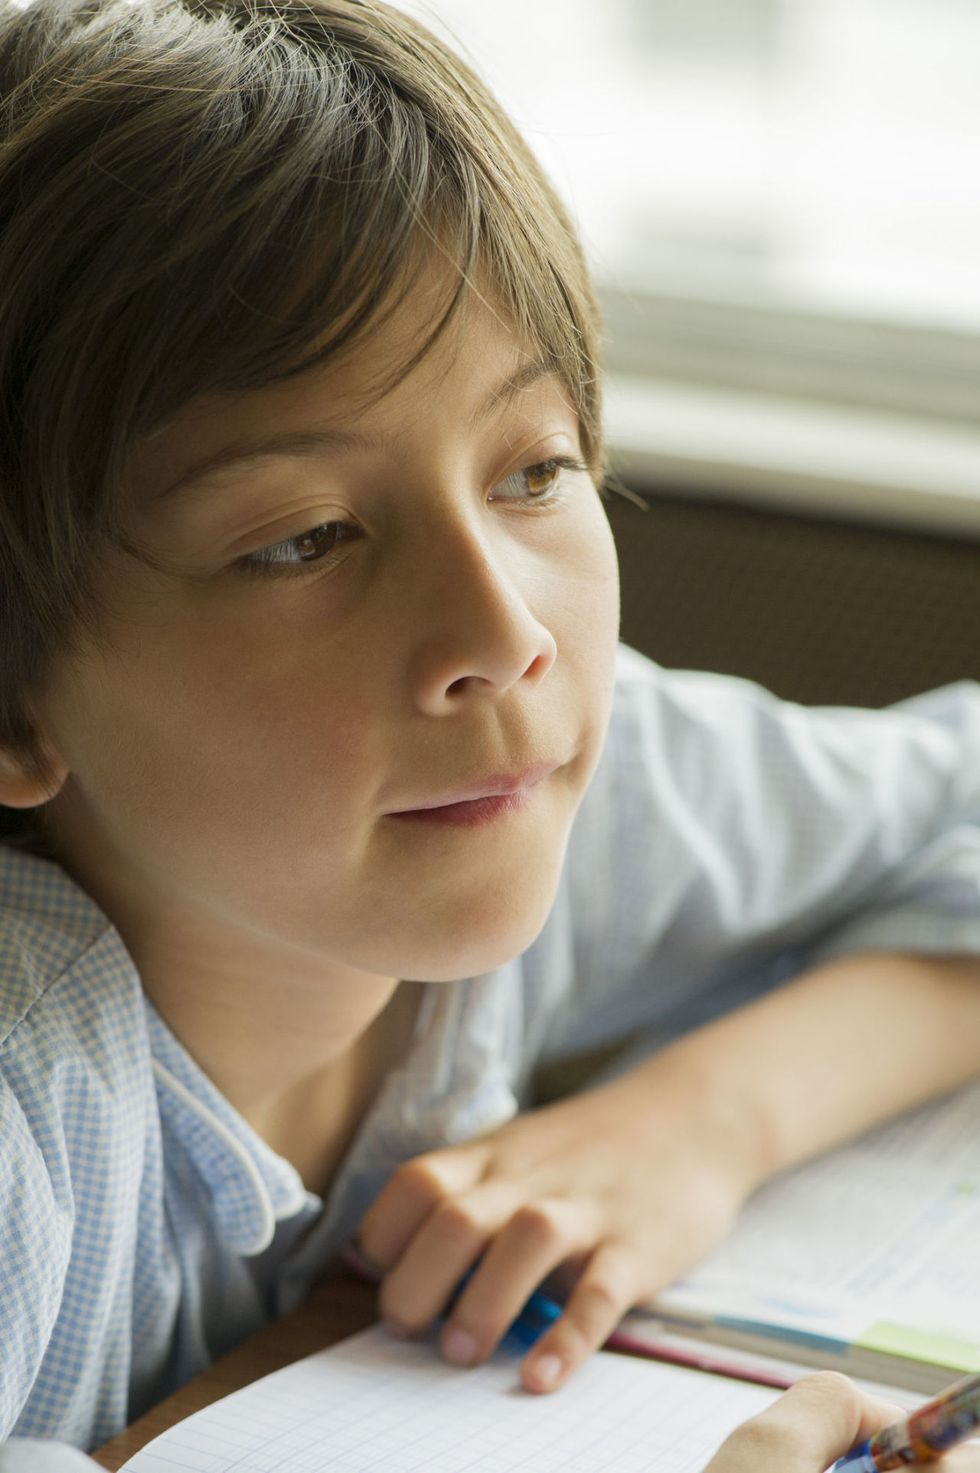 signs of child anxiety: trouble focusing